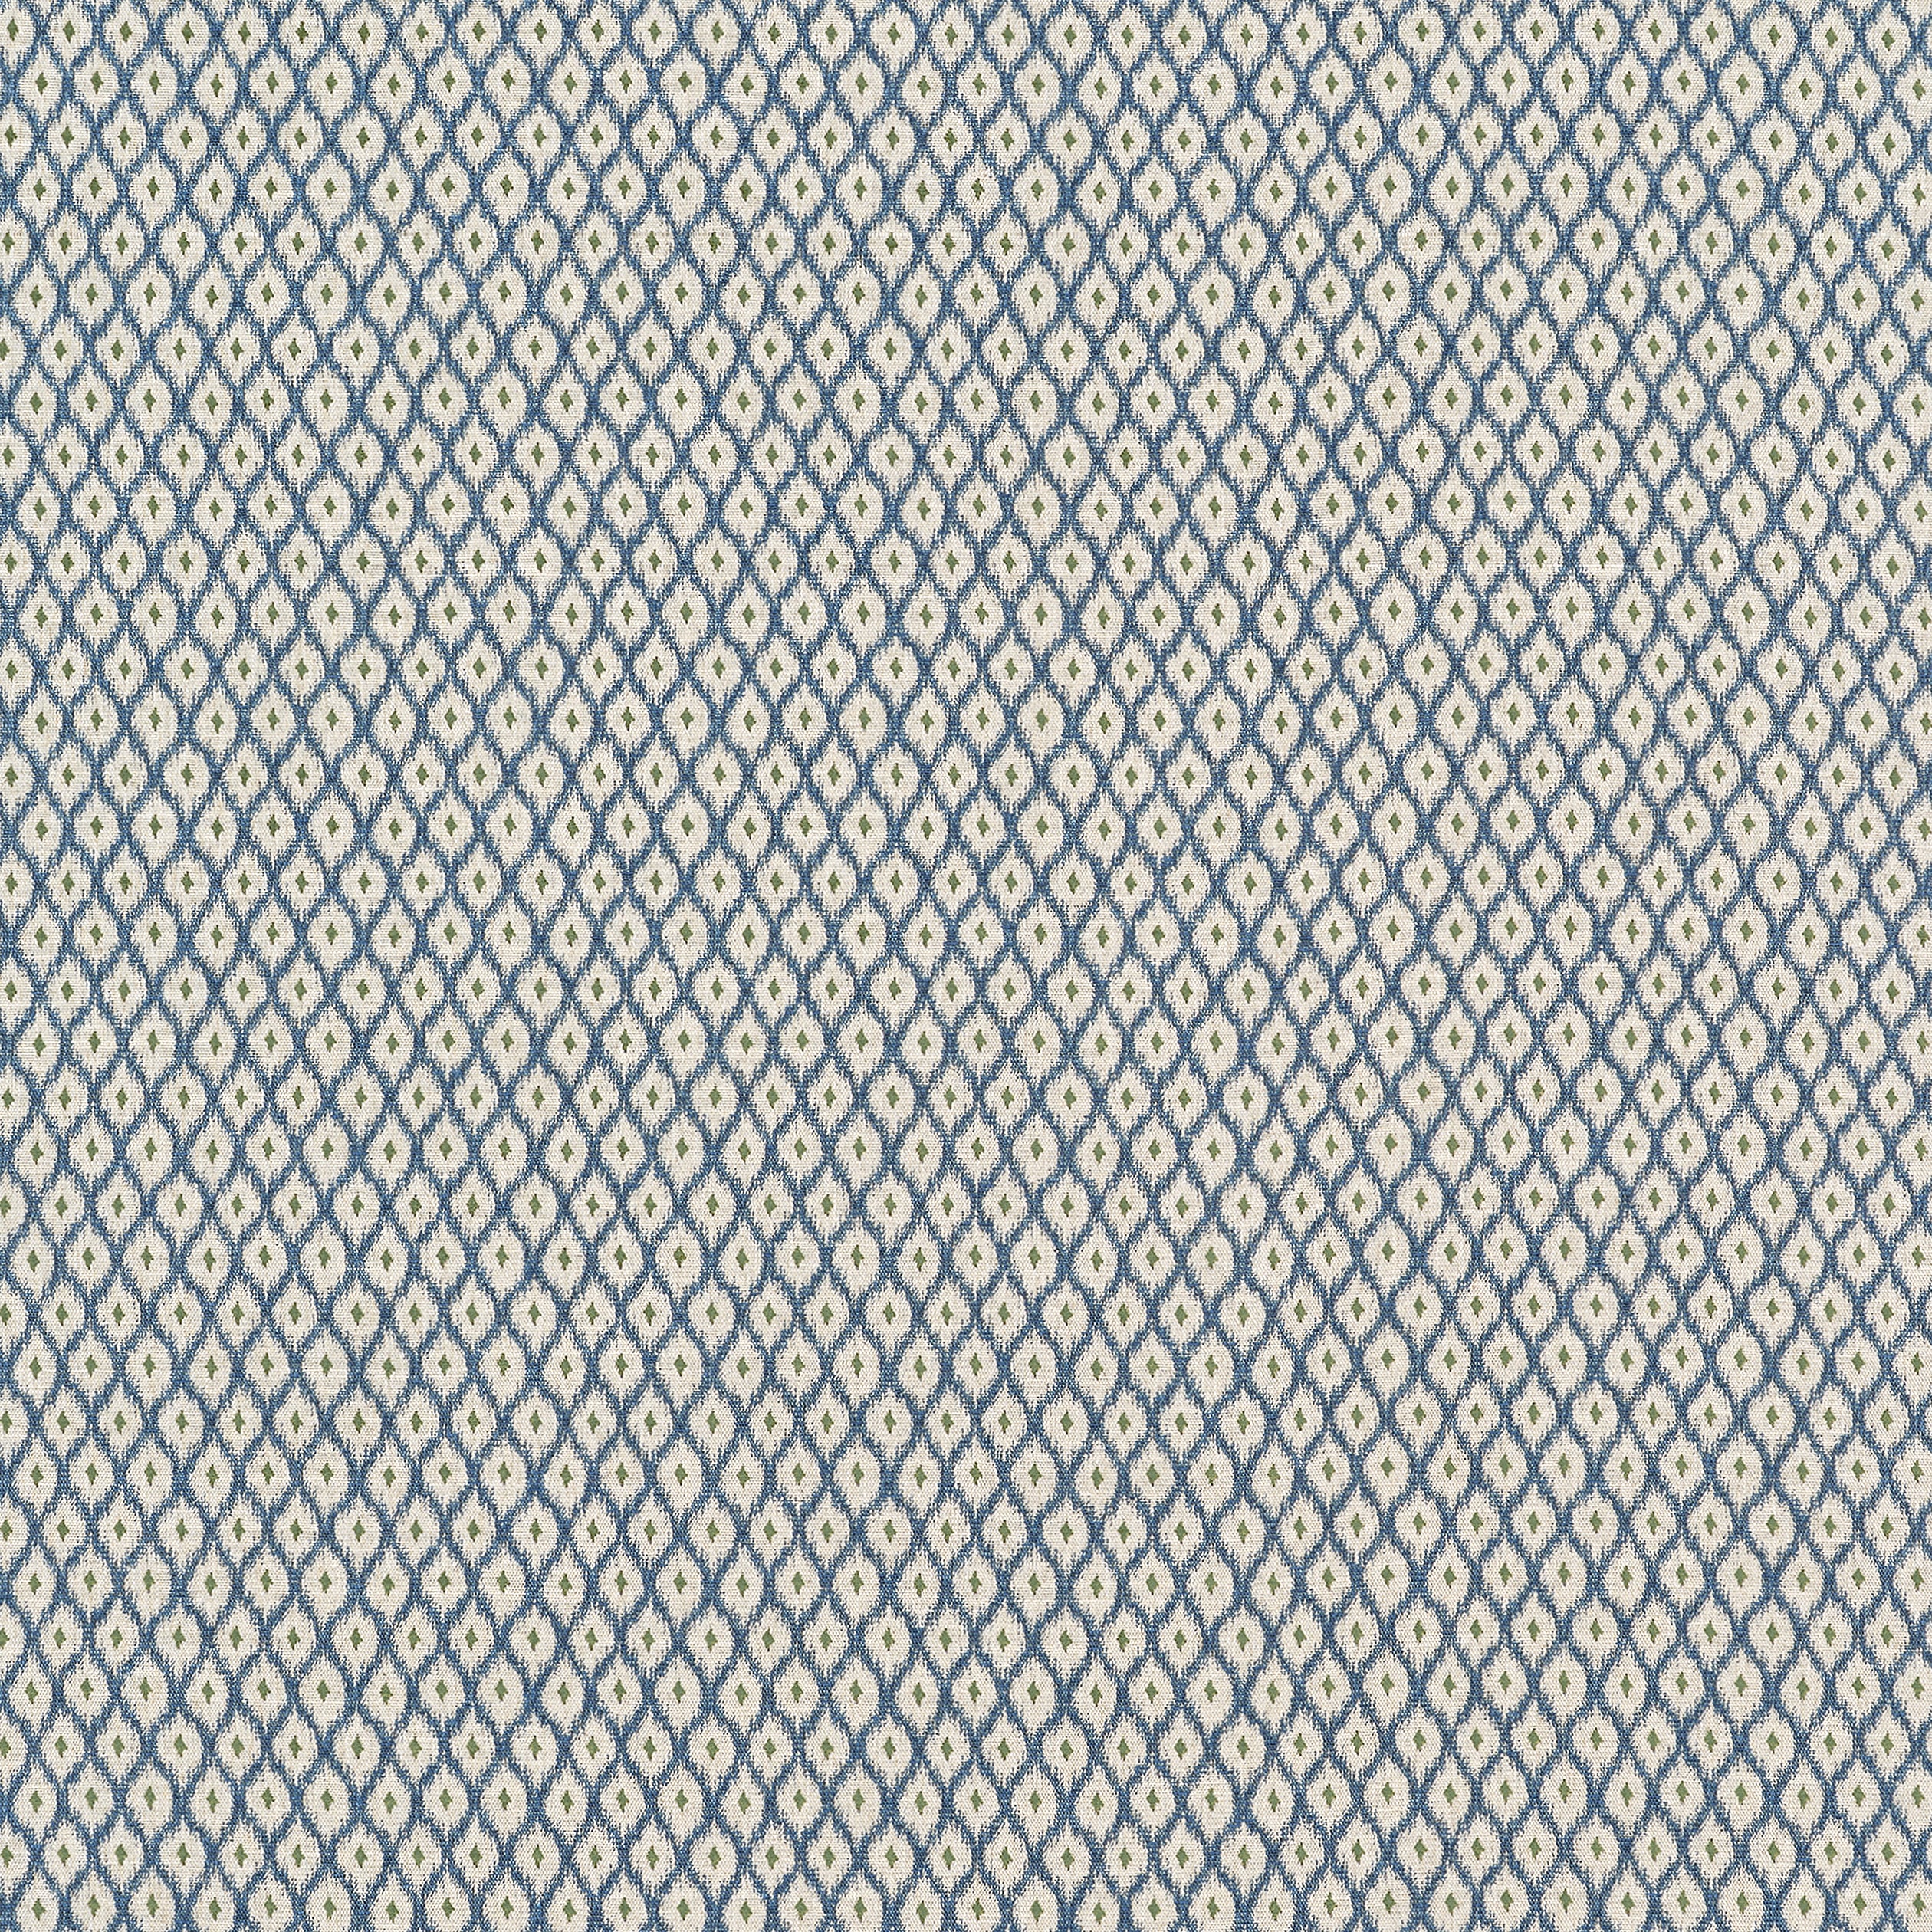 Josephine fabric in bermuda color - pattern number W81904 - by Thibaut in the Companions collection